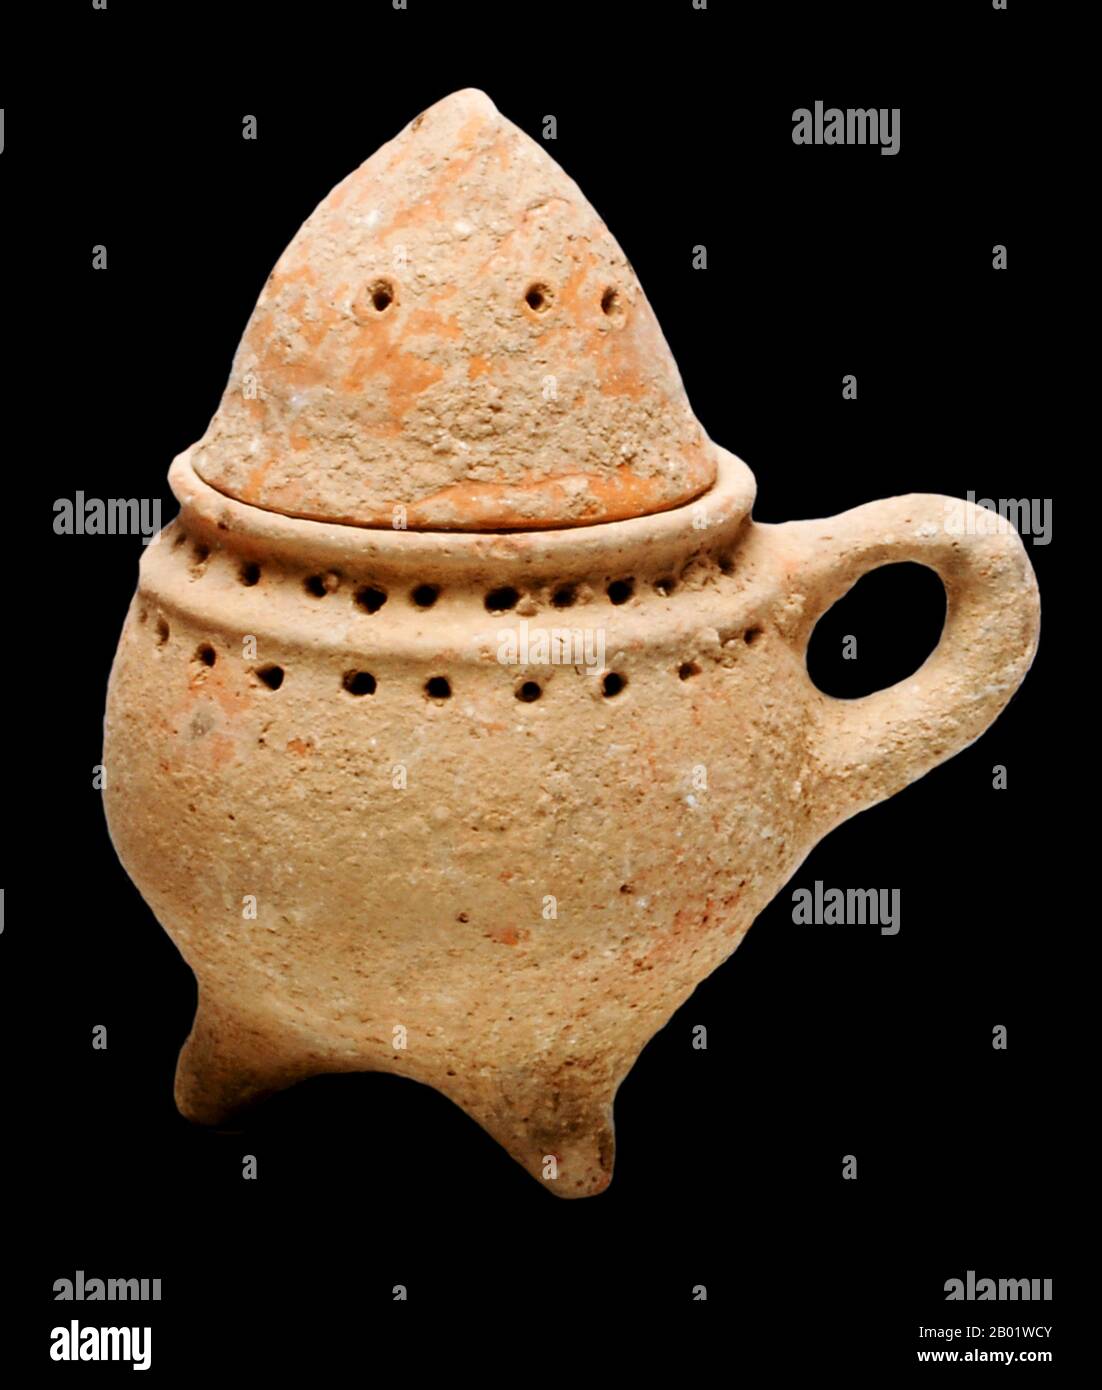 Palestine/Israel: Terracotta incense burner with lid. Iron Age period, 8th century BCE.  Incense is composed of aromatic plant materials, often combined with essential oils. The forms taken by incense differ with the underlying culture, and have changed with advances in technology and increasing diversity in the reasons for burning it.  Incense can generally be separated into two main types: 'indirect-burning' and 'direct-burning.' Indirect-burning incense (or 'non-combustible incense') is not capable of burning on its own, and requires a separate heat source. Stock Photo